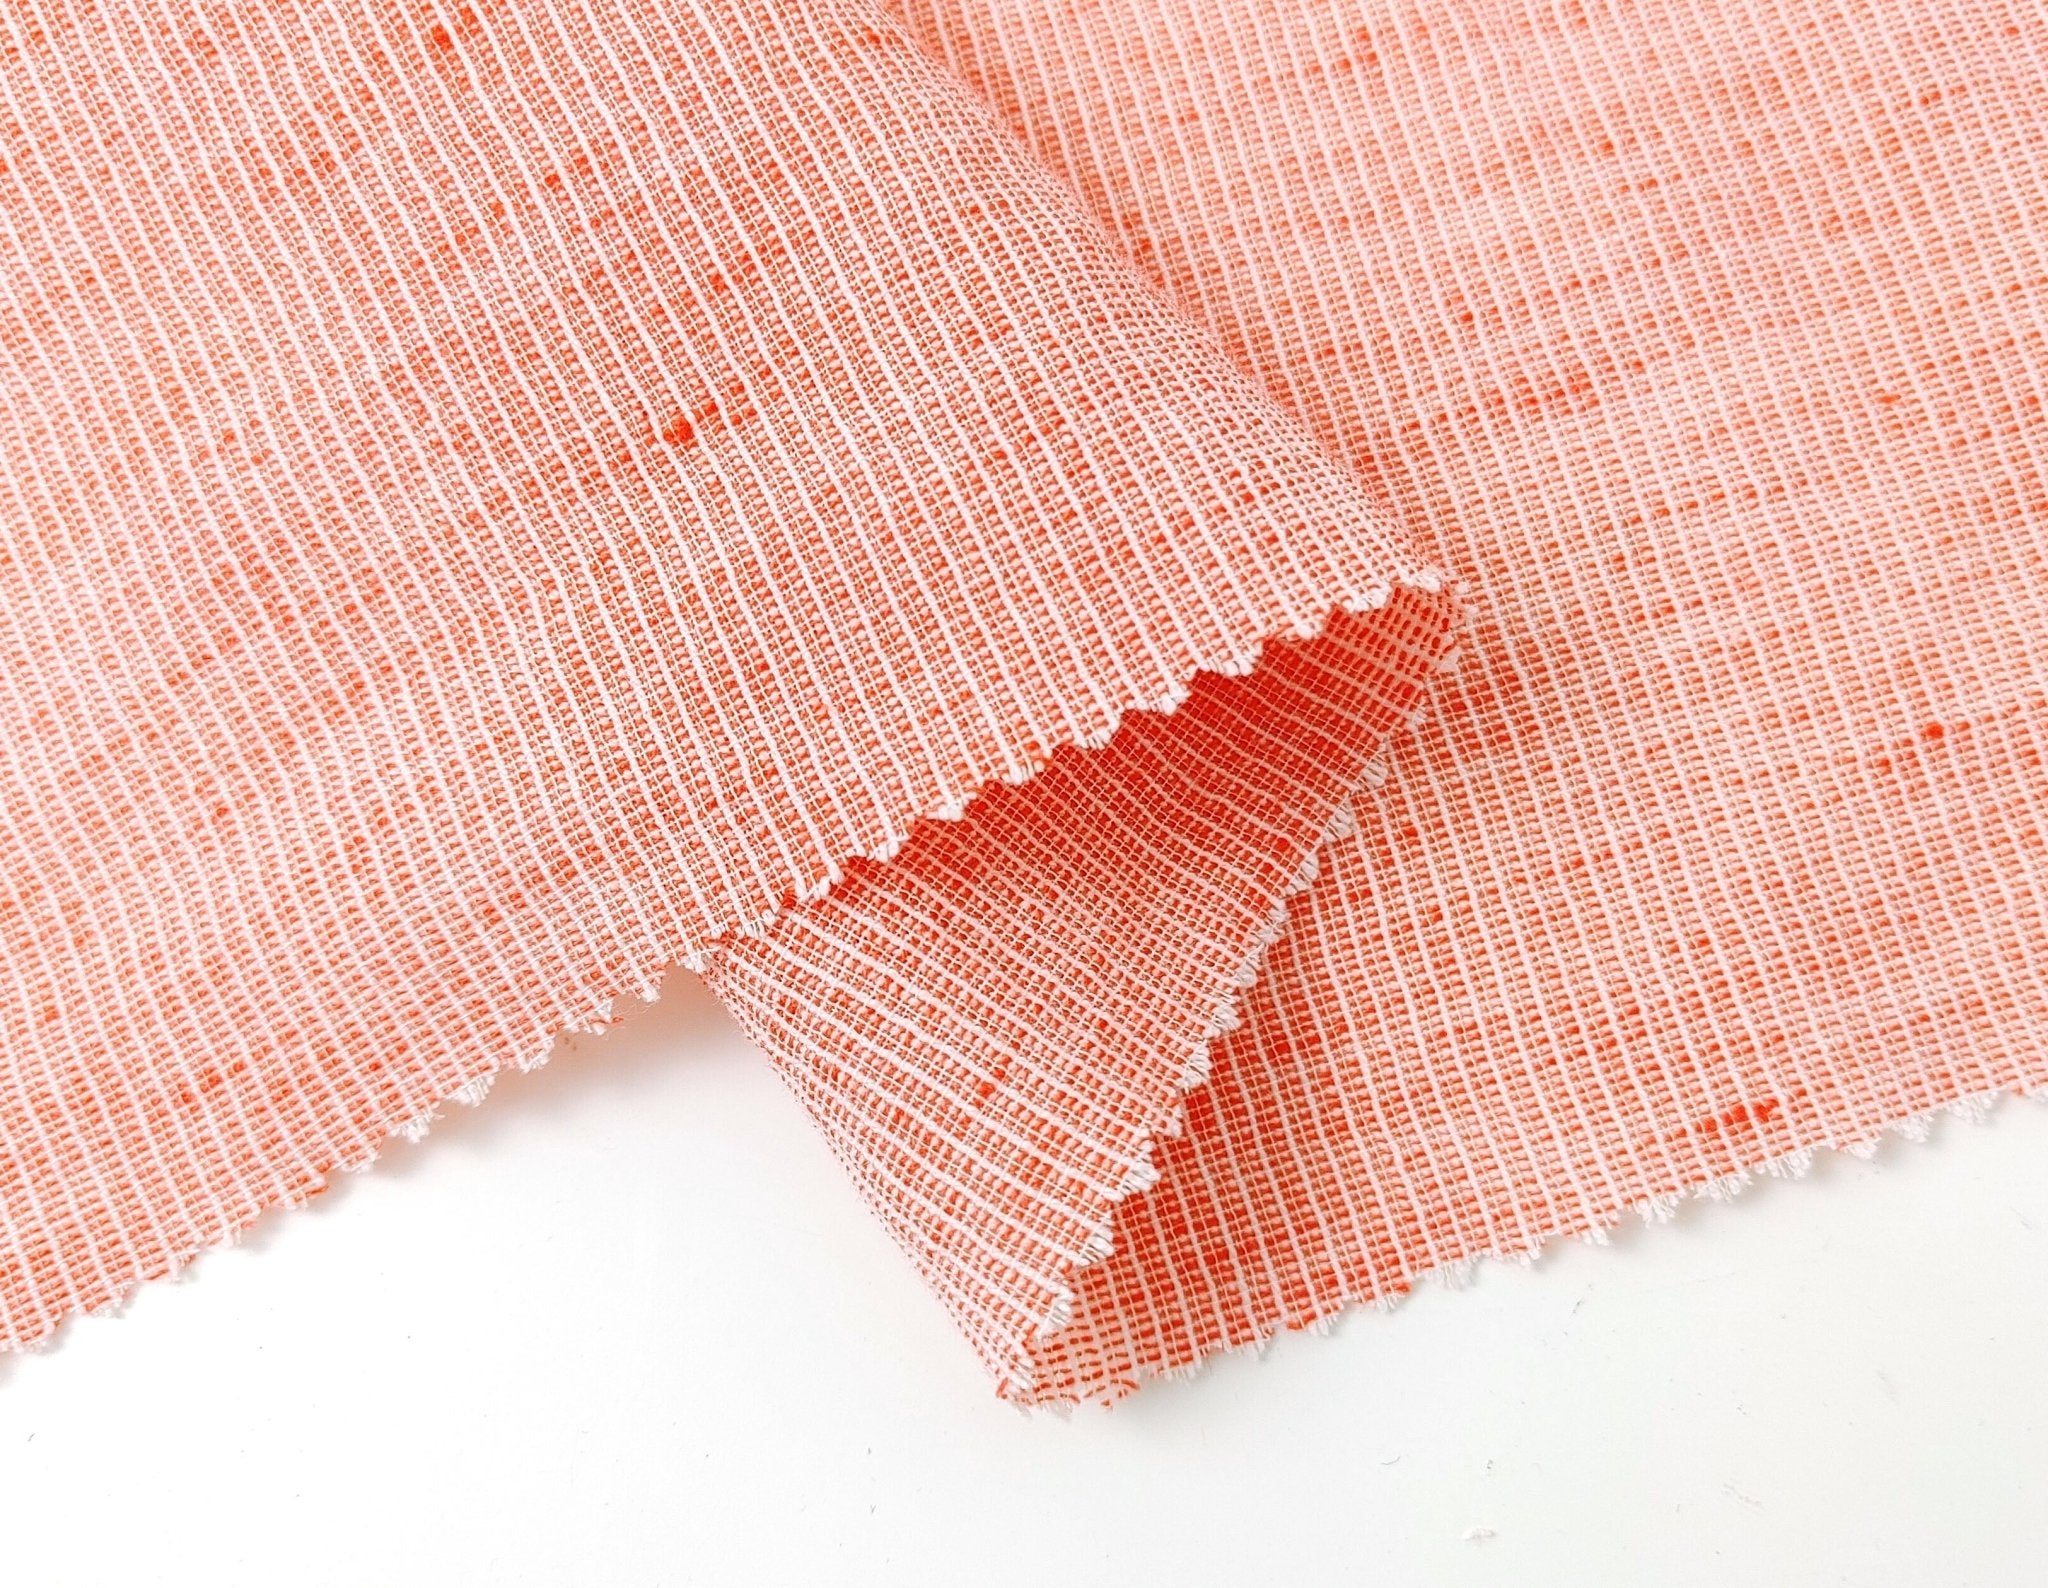 Light Weight Linen Cotton Stripe Fabric with Subtle Wrinkle Effect 7790 7791 7792 7793 7794 - The Linen Lab - Orange